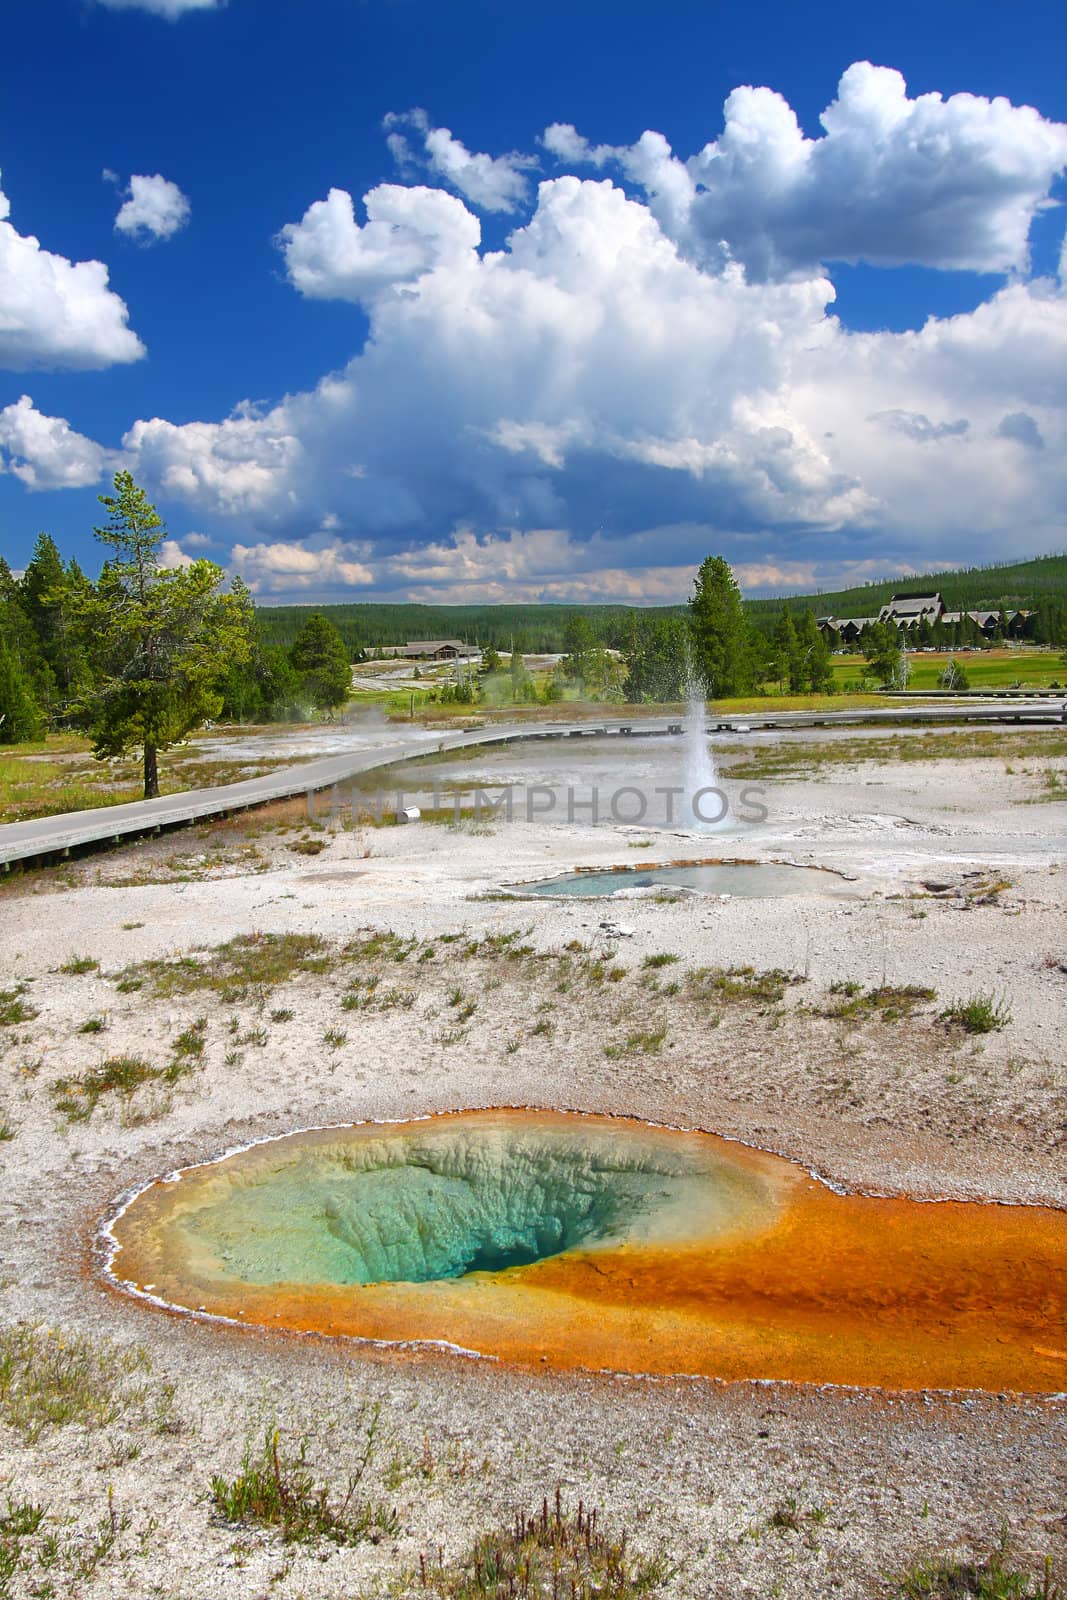 Belgian Pool of Yellowstone by Wirepec